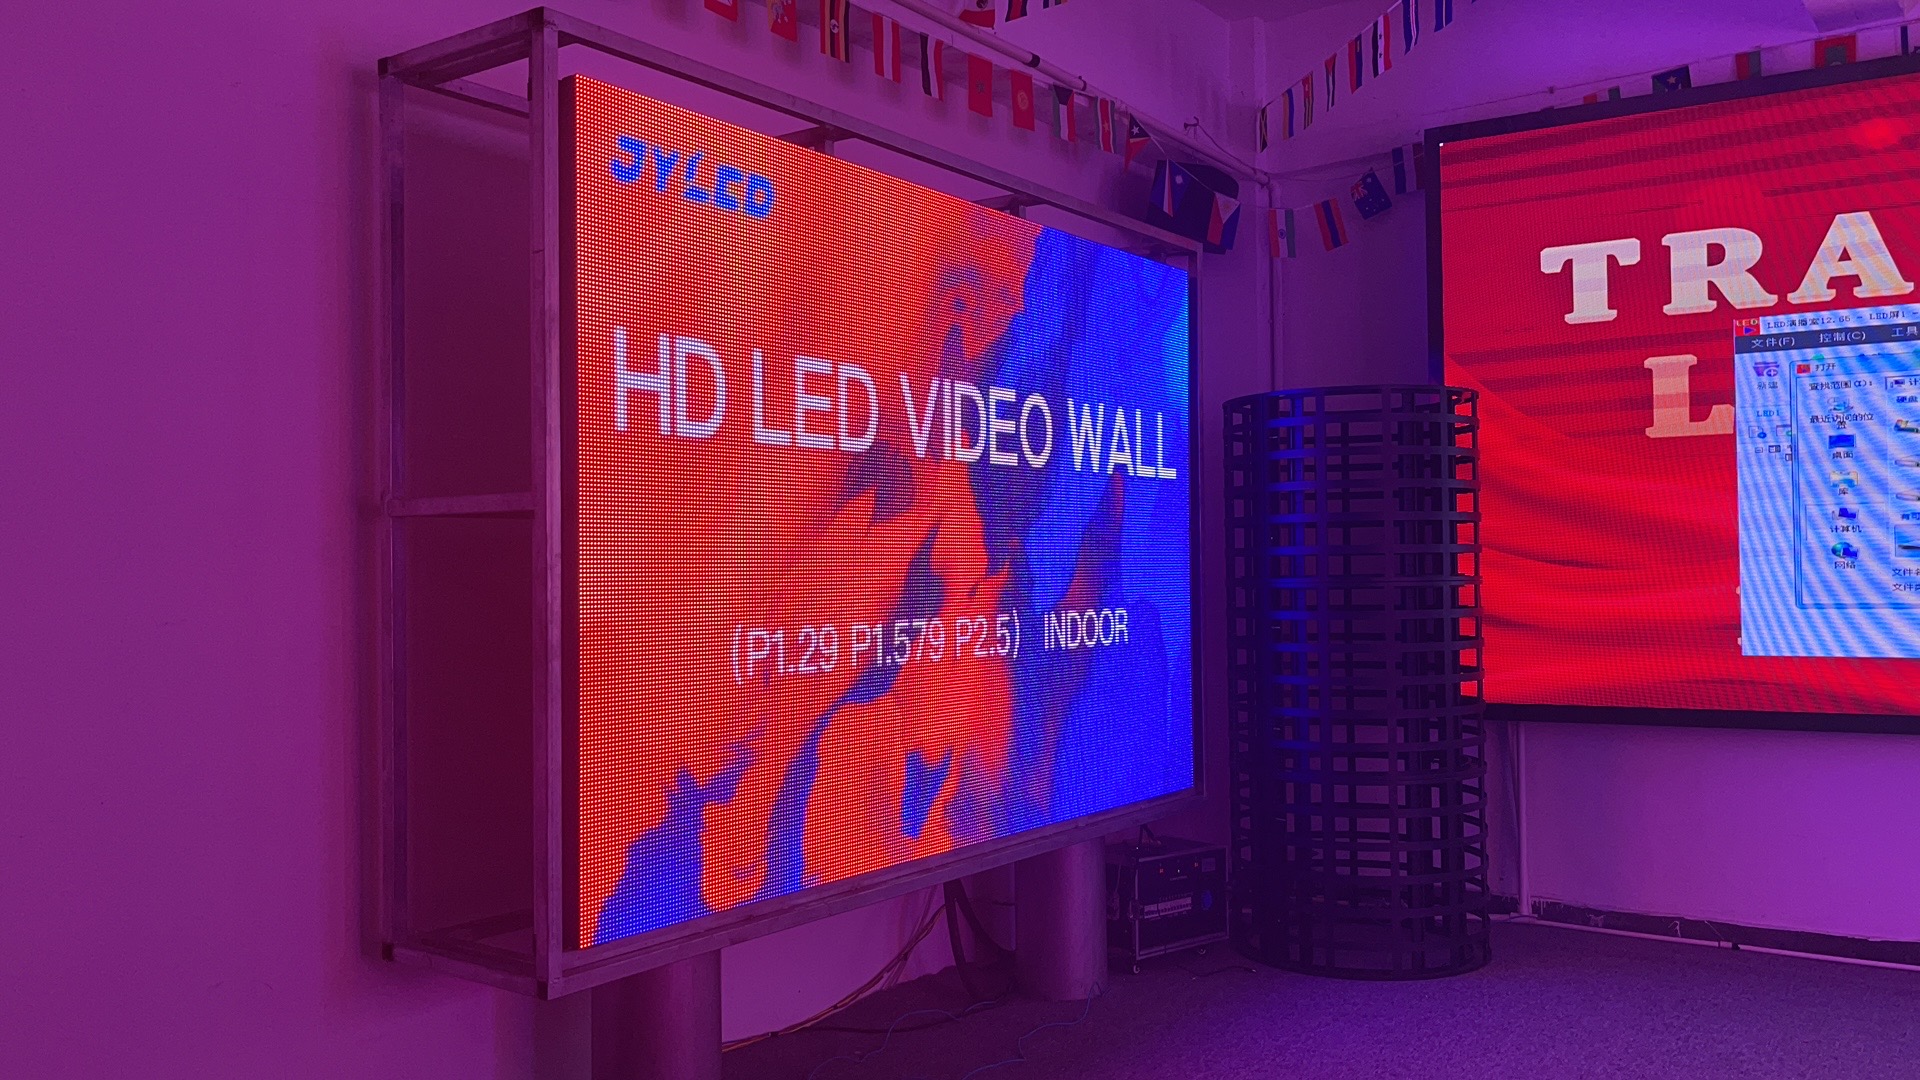 The use of LED video wall in the activity display area.